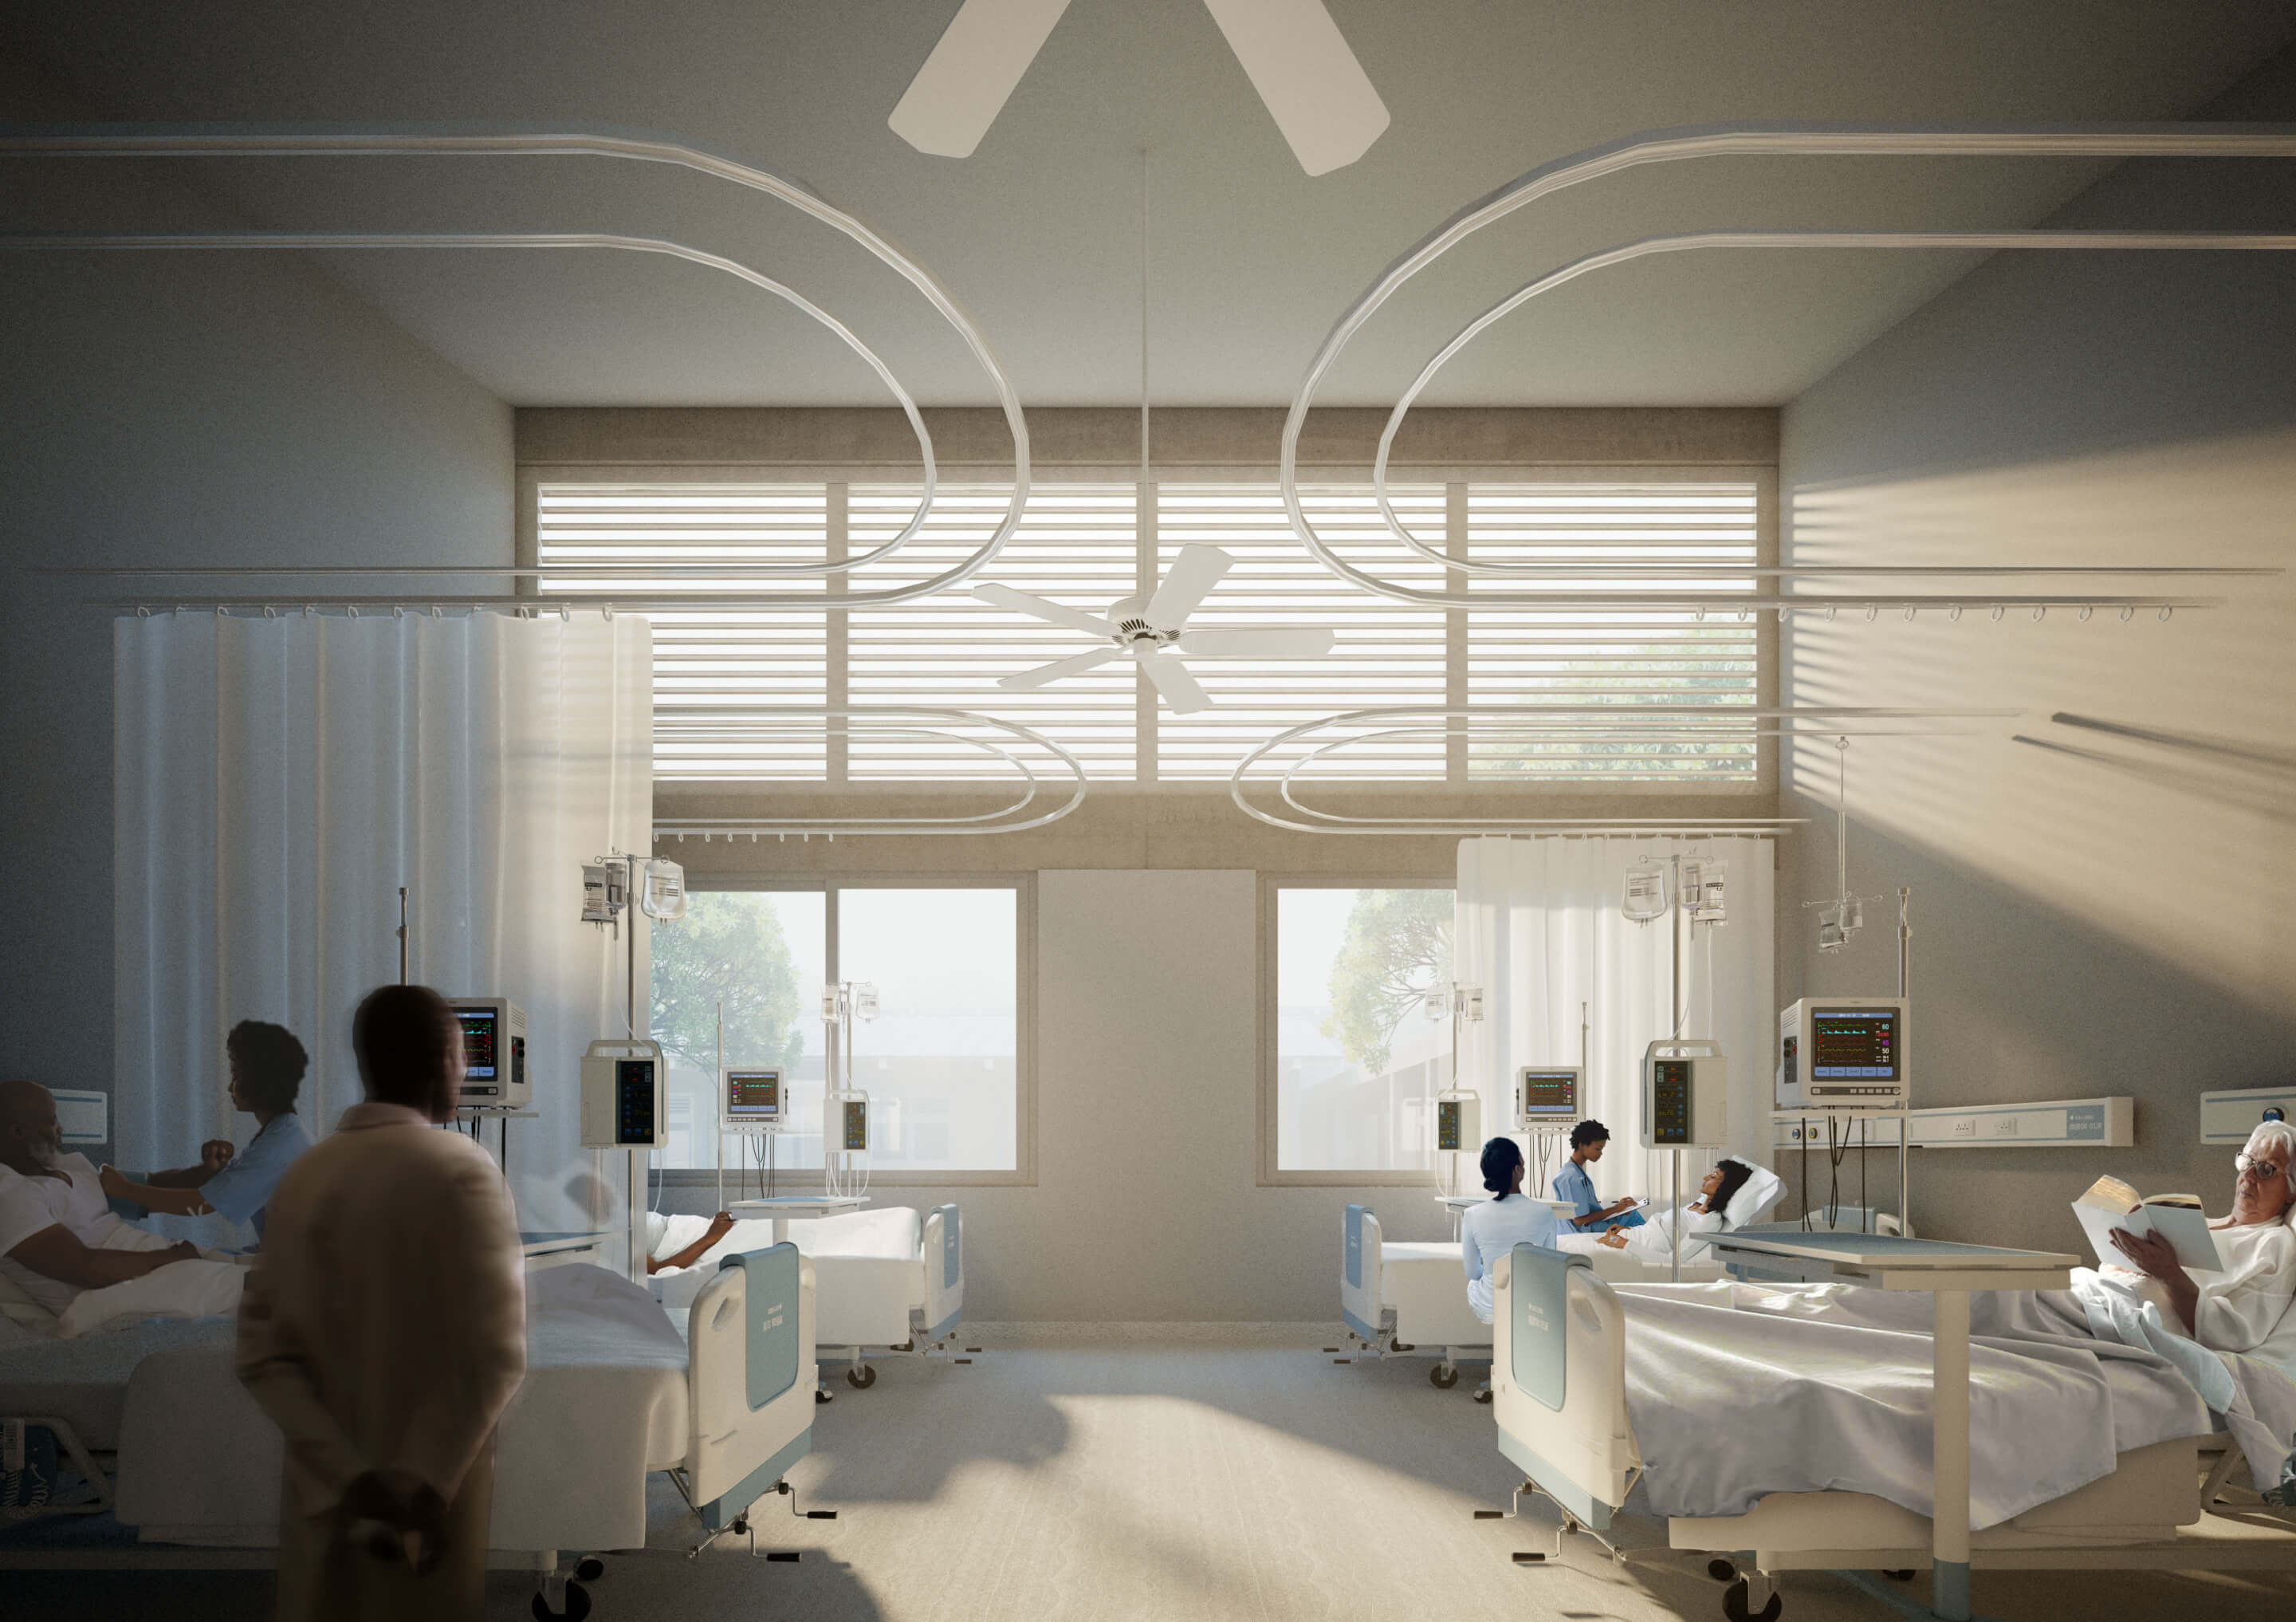 rendering of a hospital patient ward